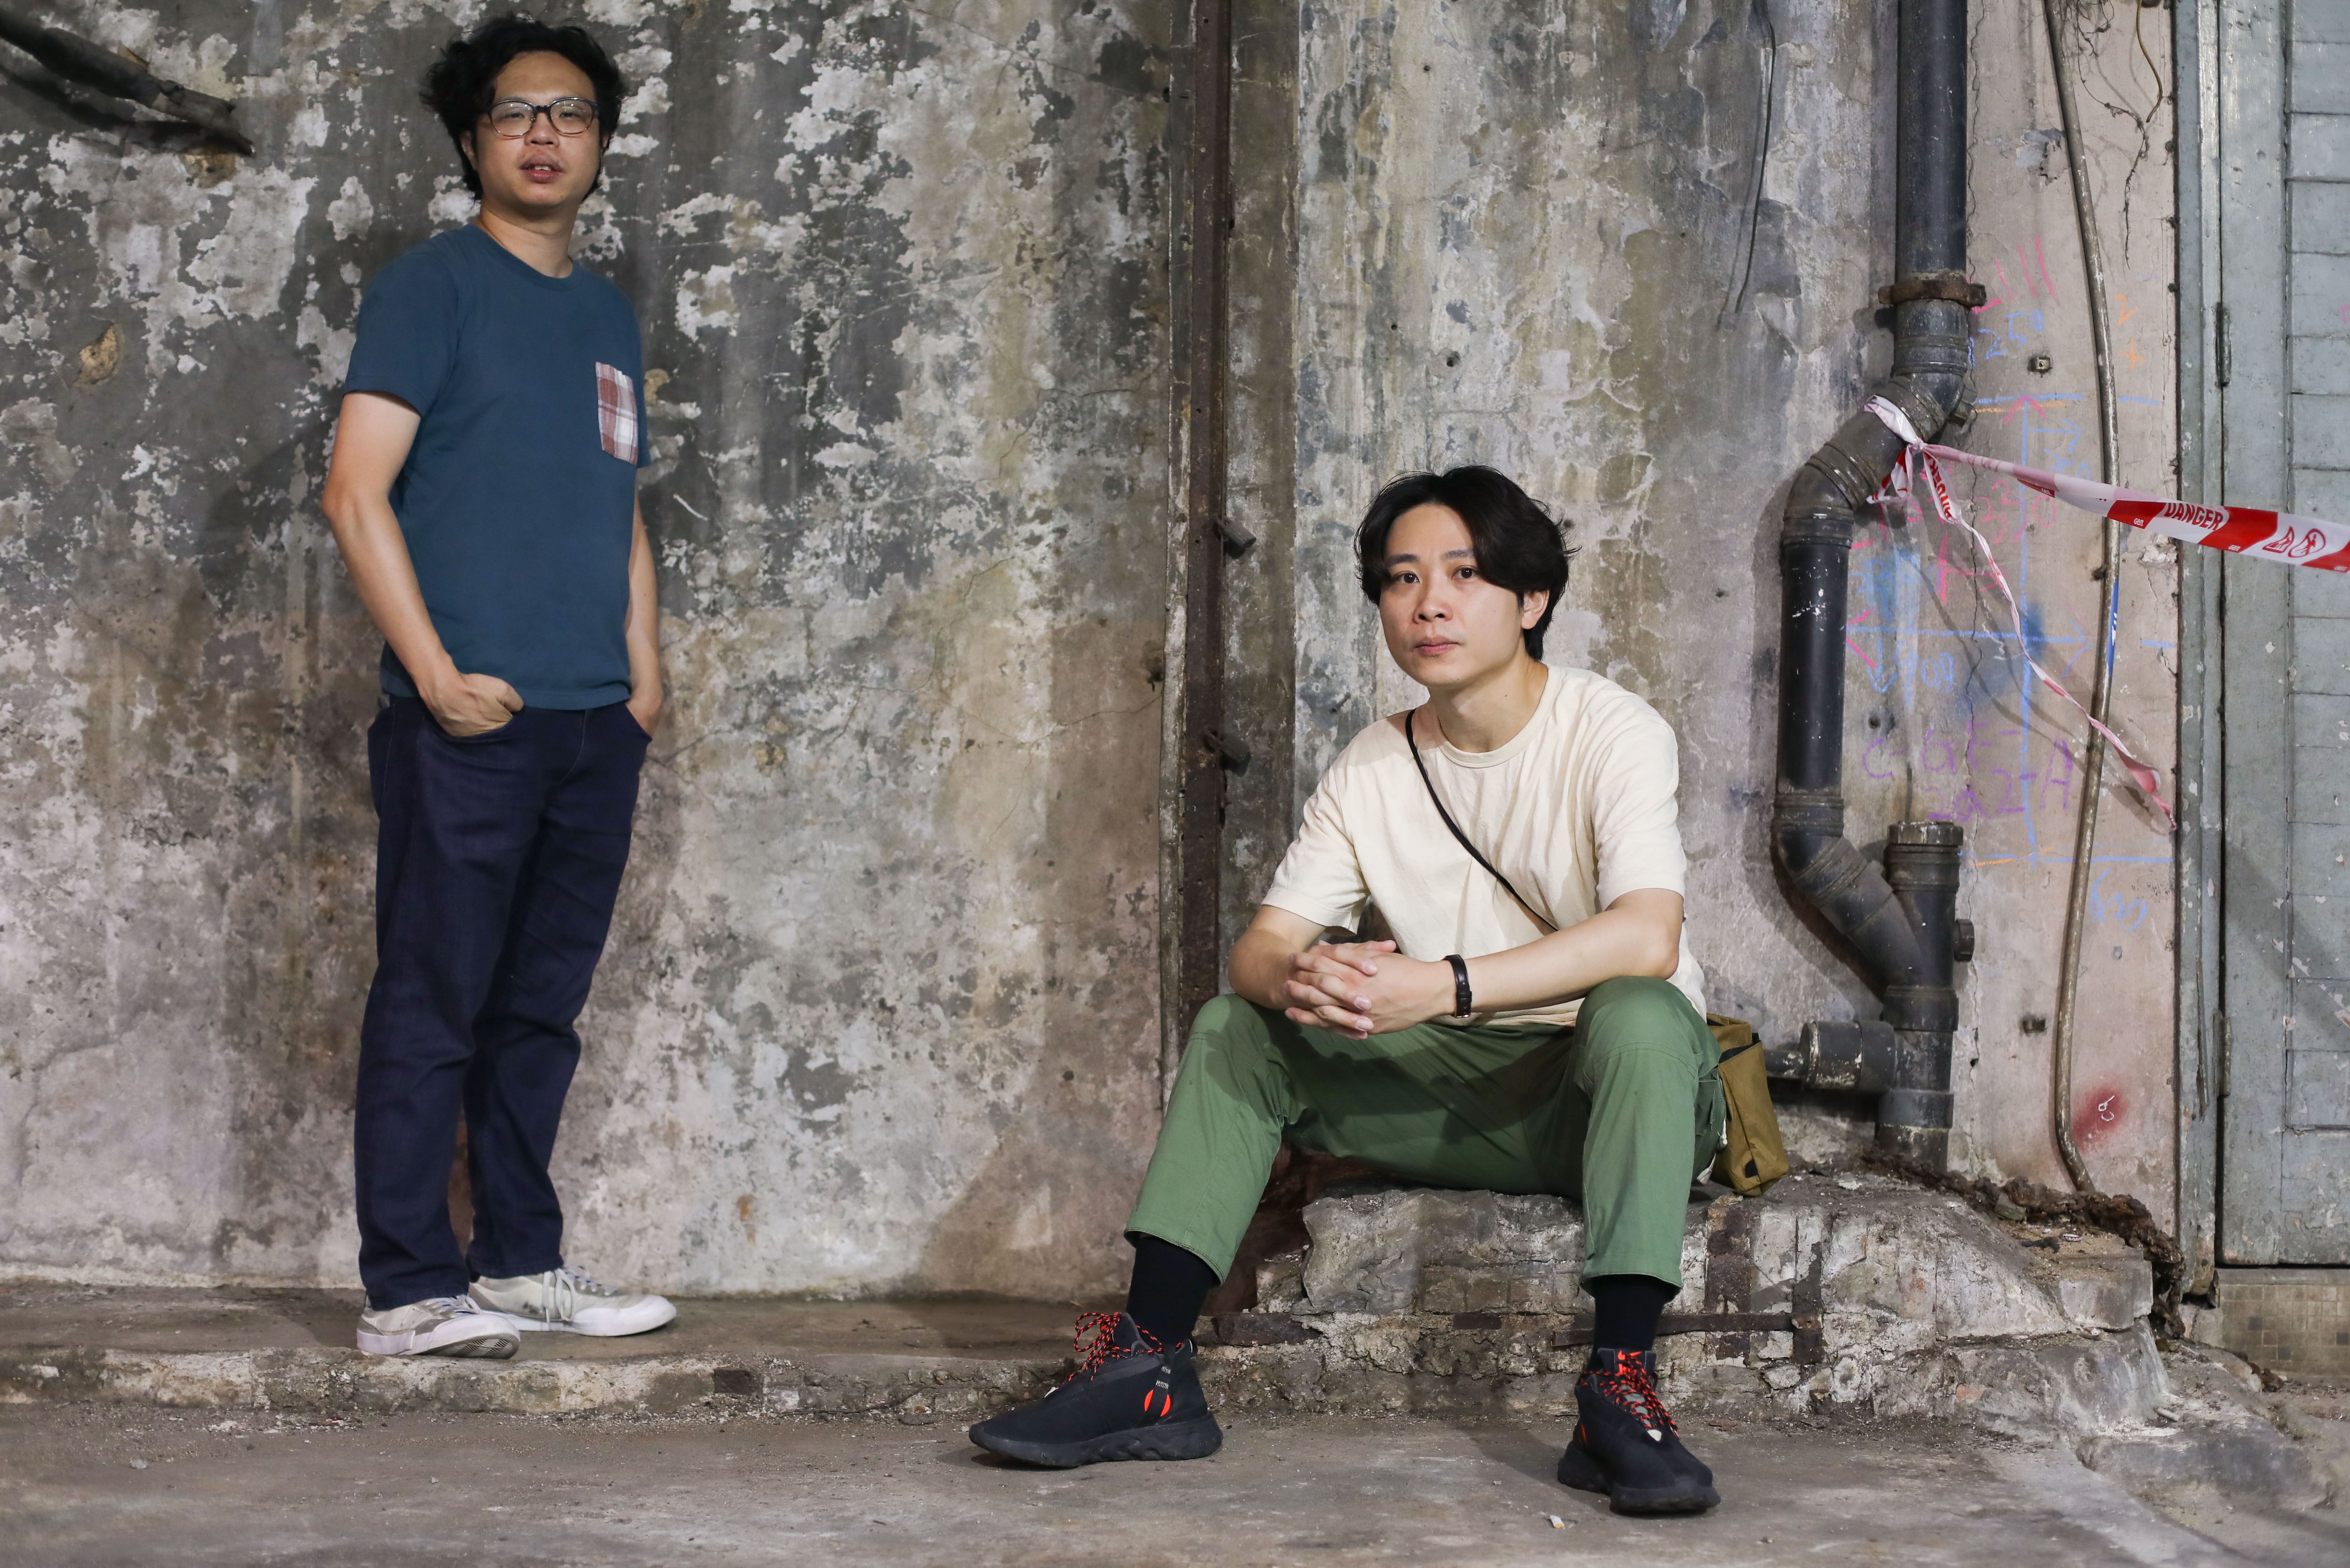 Sampson Wong (left) and Eric Tsang set up the ‘When in doubt, take a walk’ YouTube channel. Photo: Xiaomei Chen